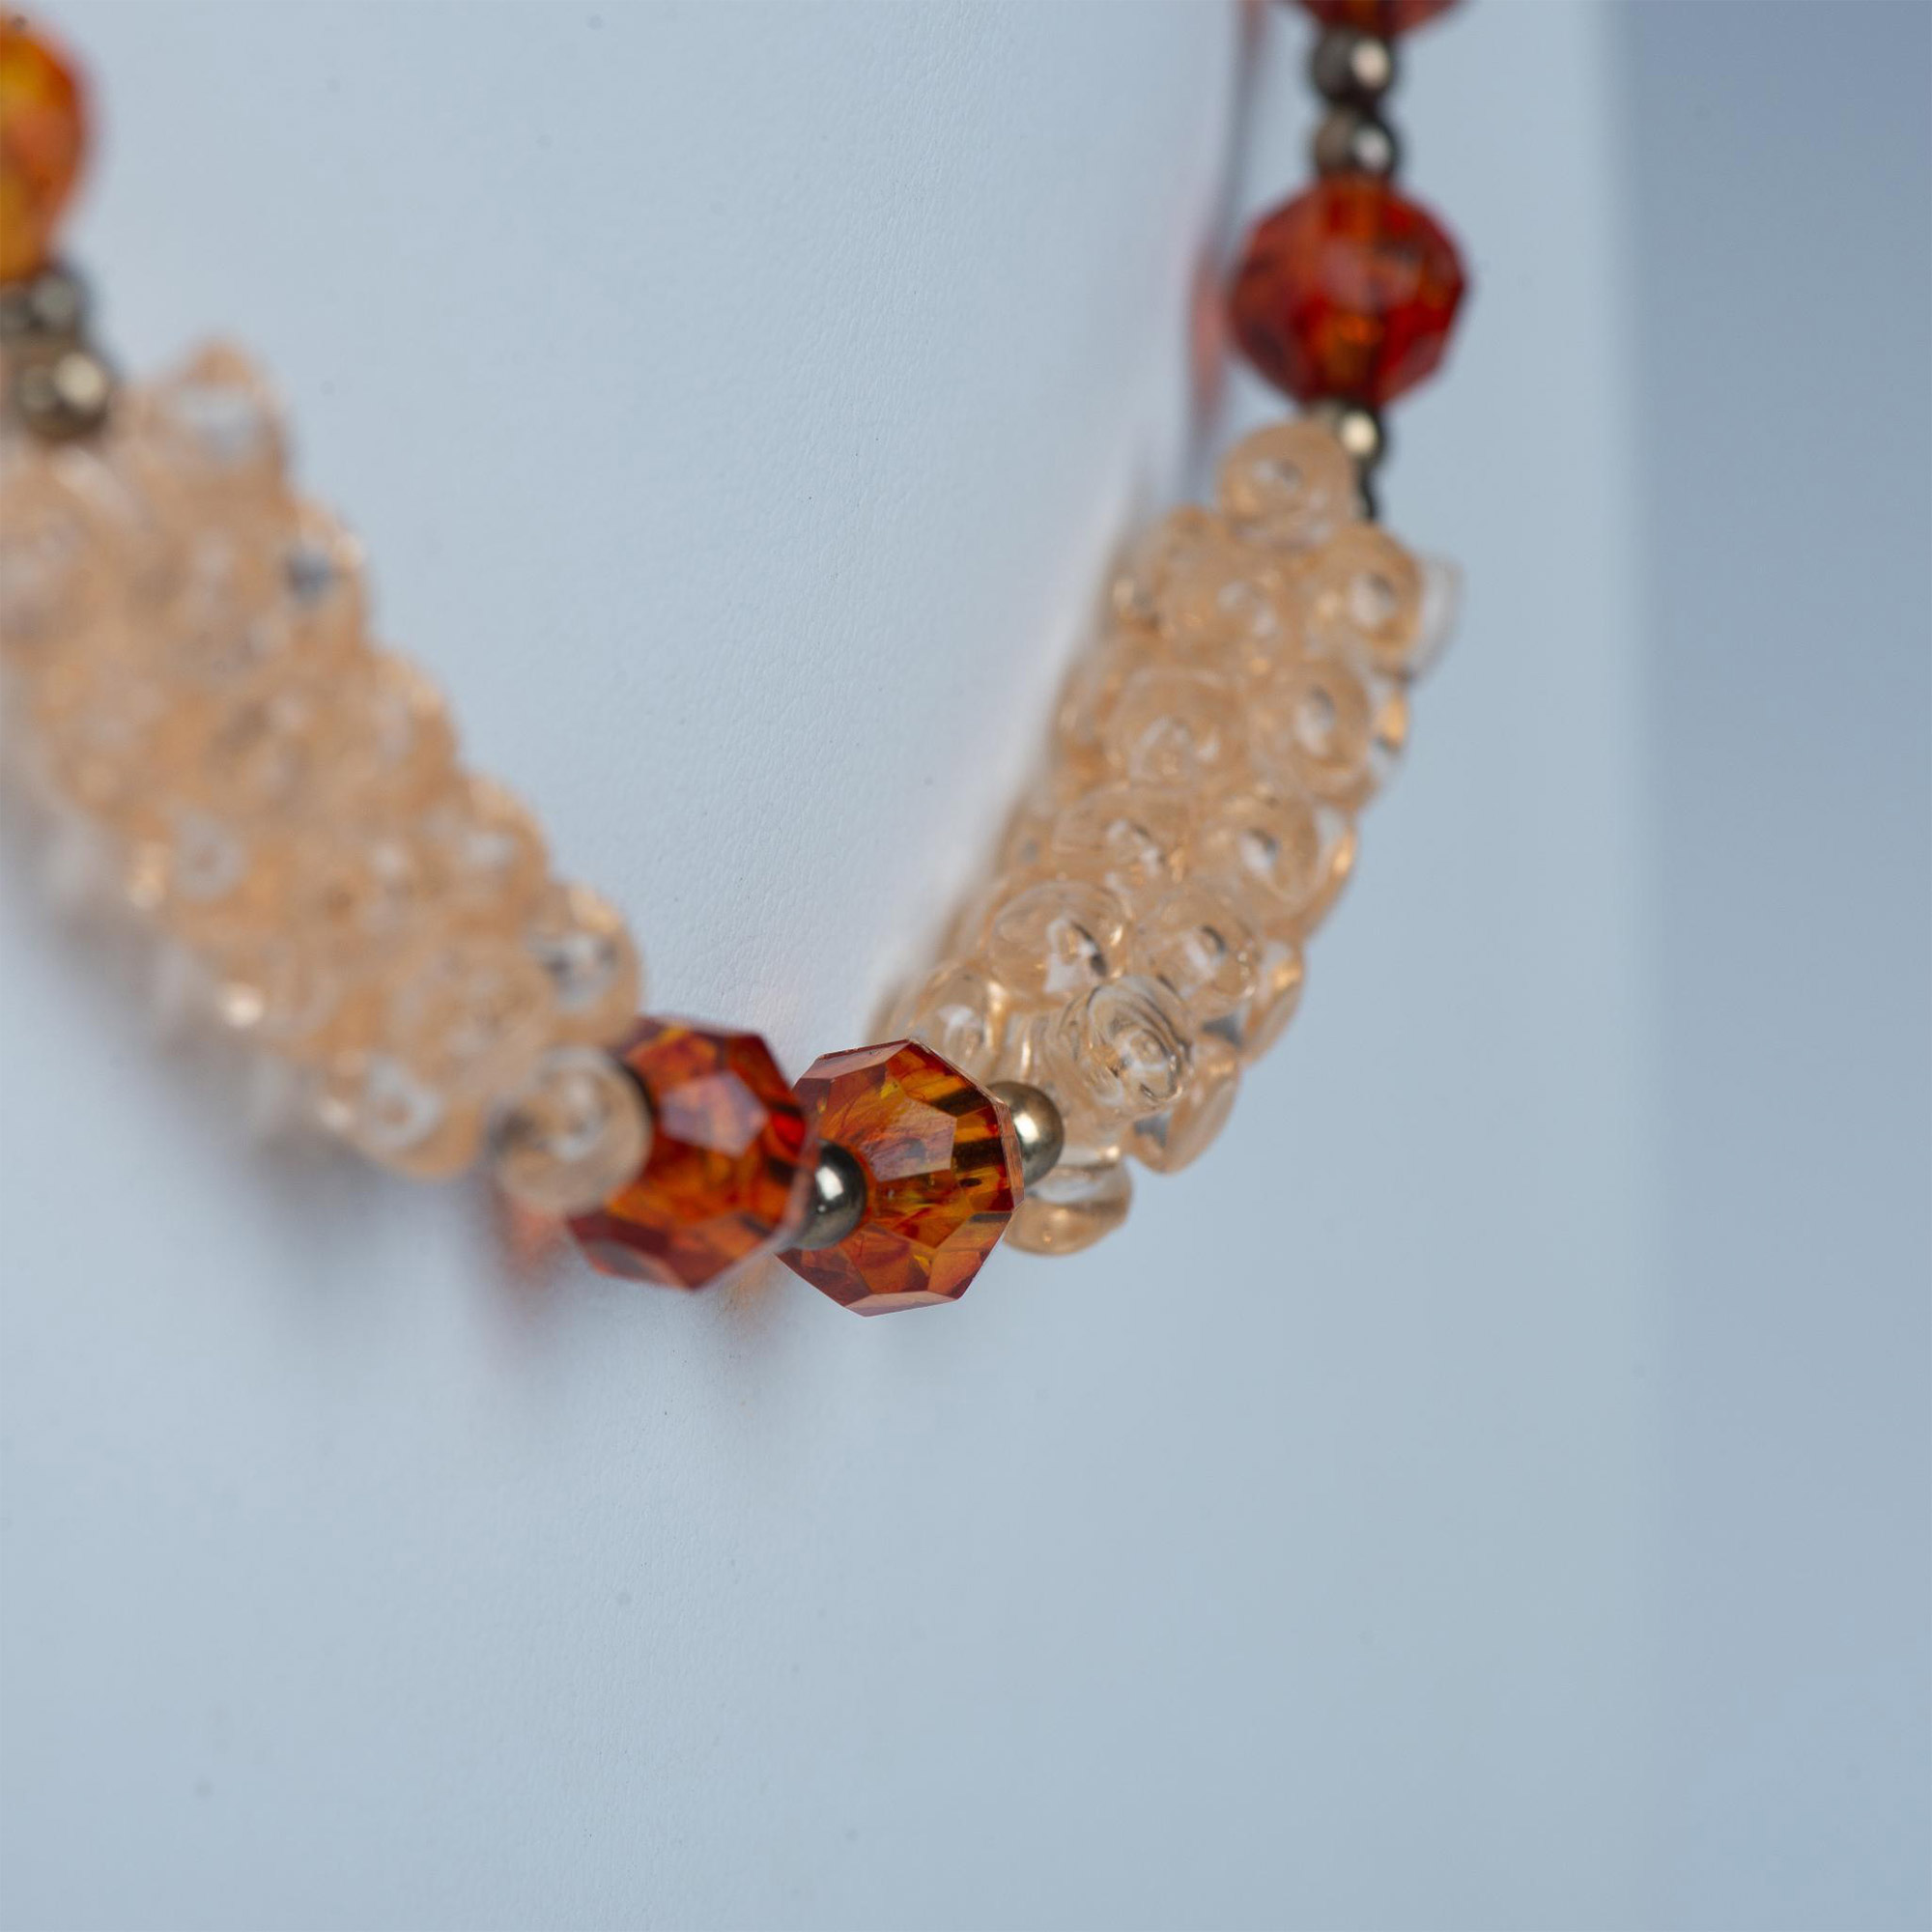 Cute Peach and Amber Colored Bead Necklace - Image 2 of 3